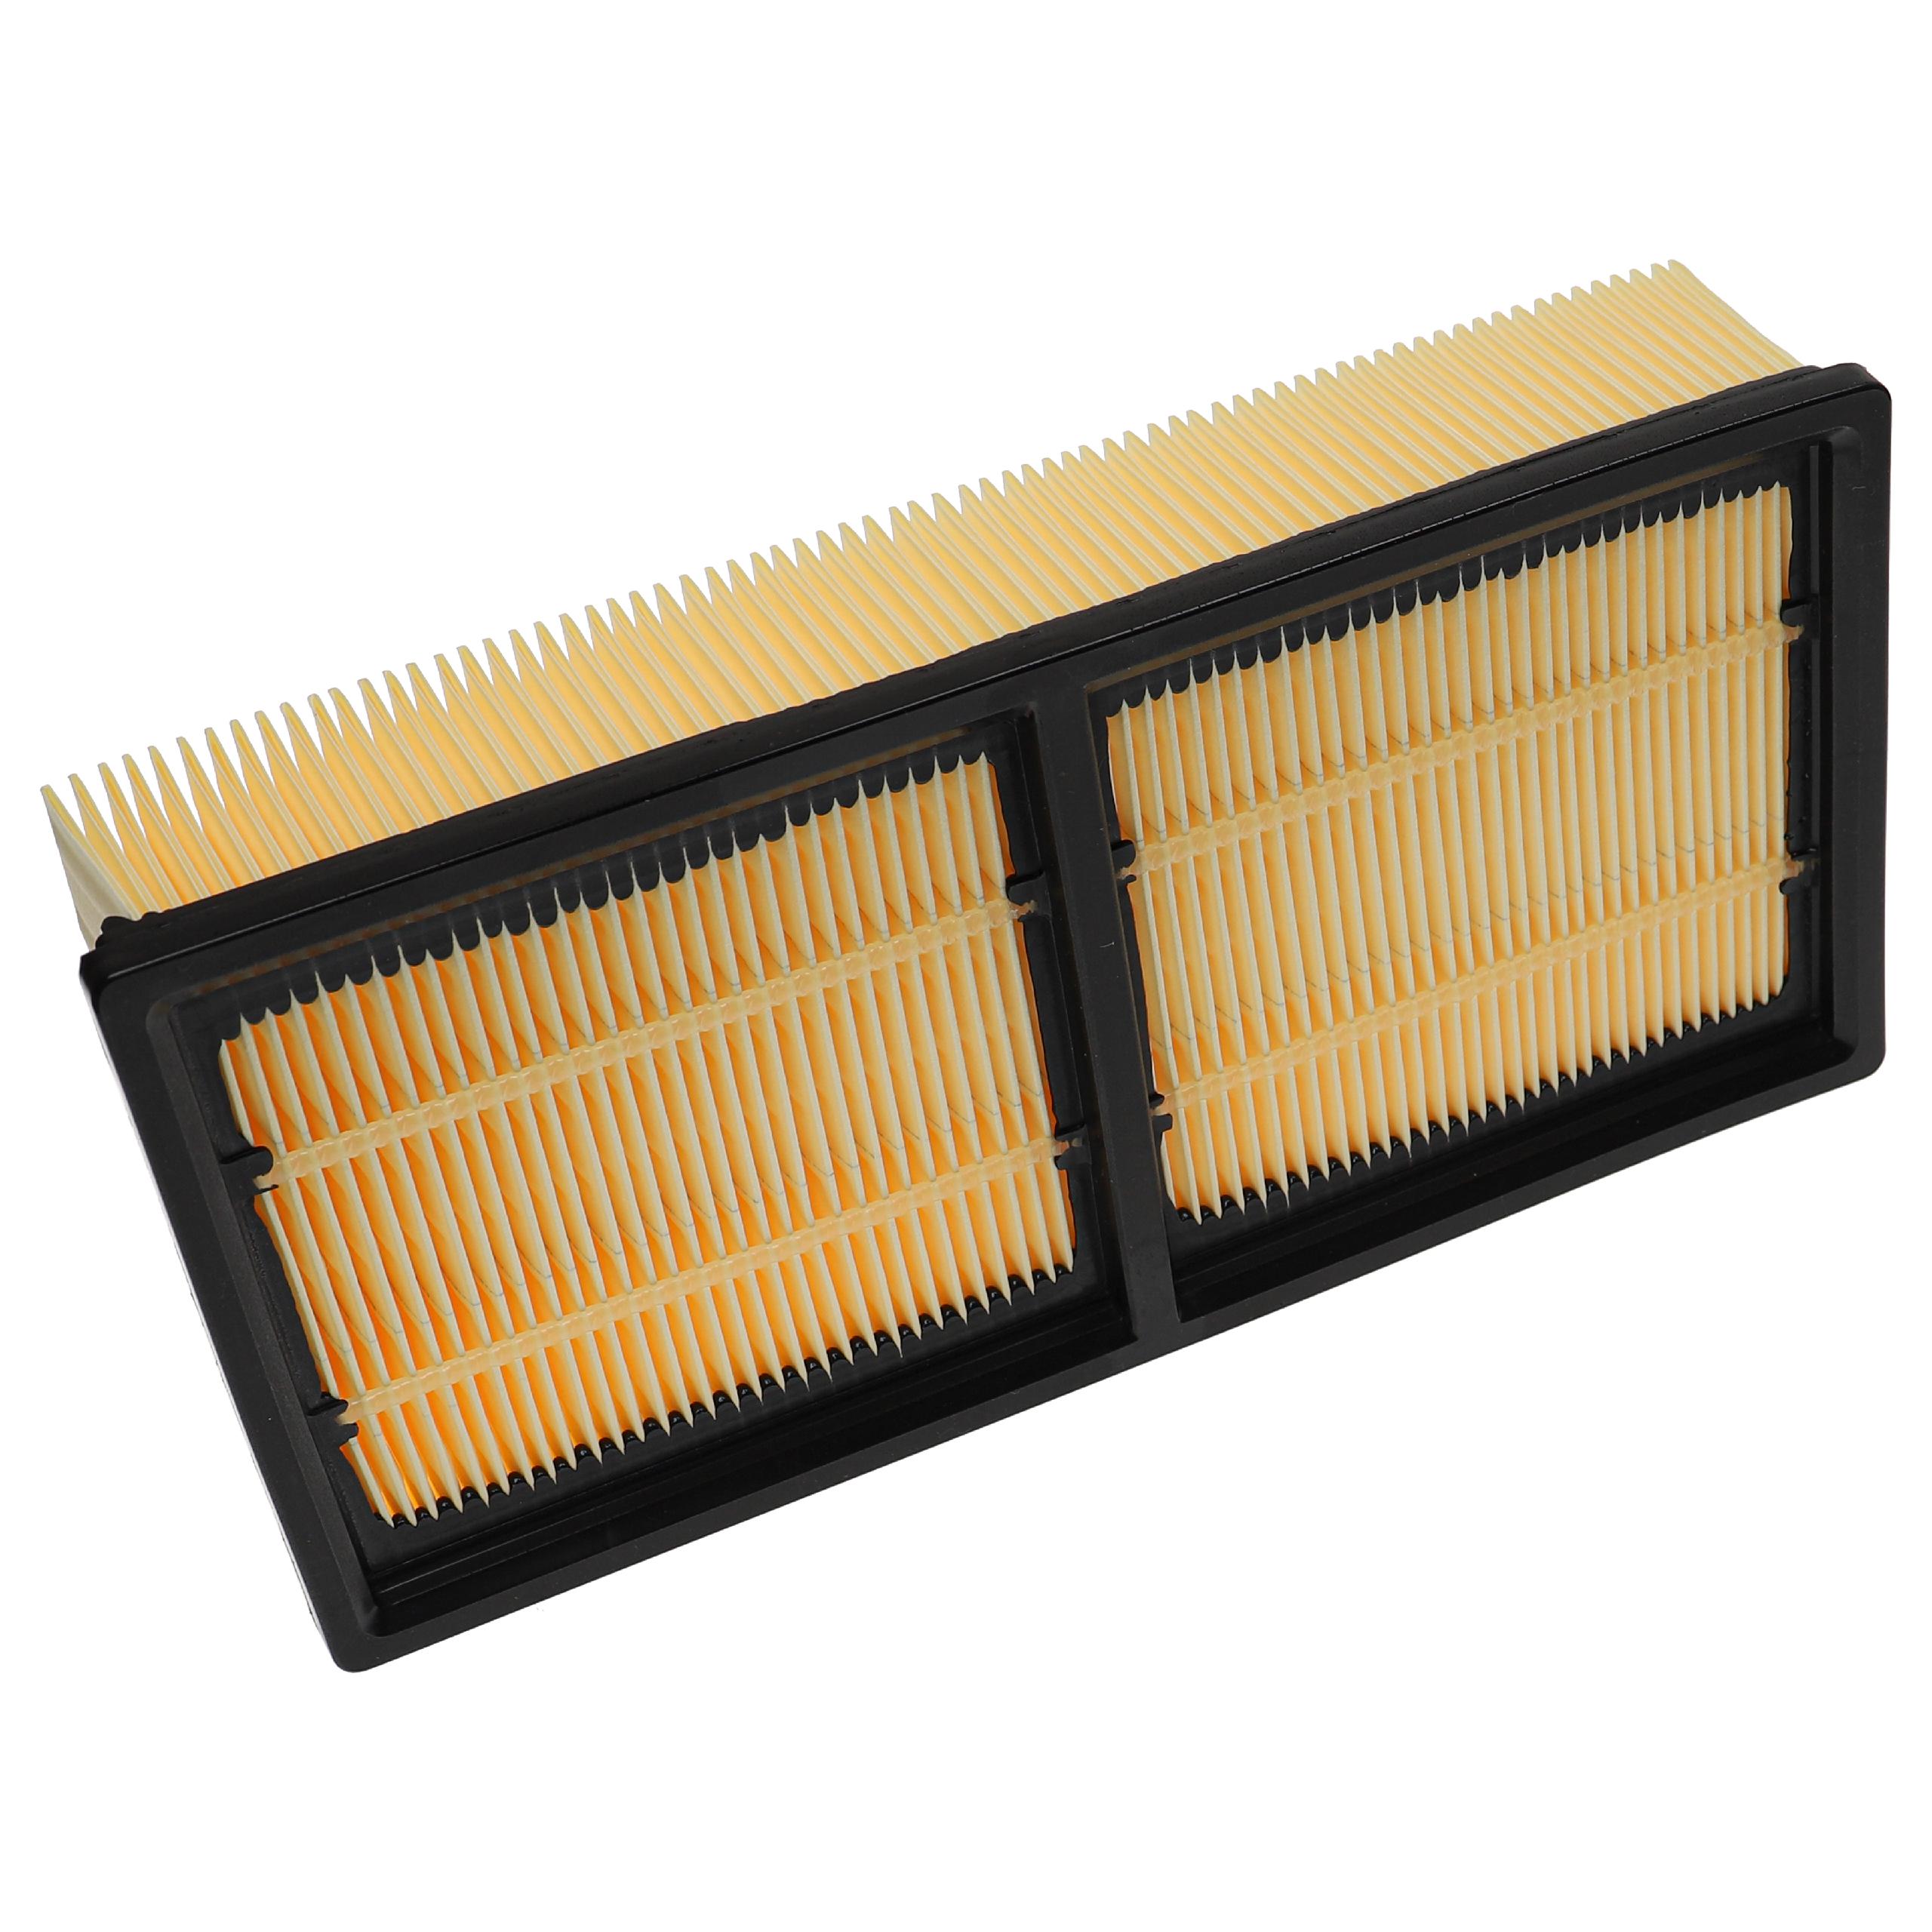 1x flat pleated filter replaces Kärcher 6.907-276.0 for KärcherVacuum Cleaner